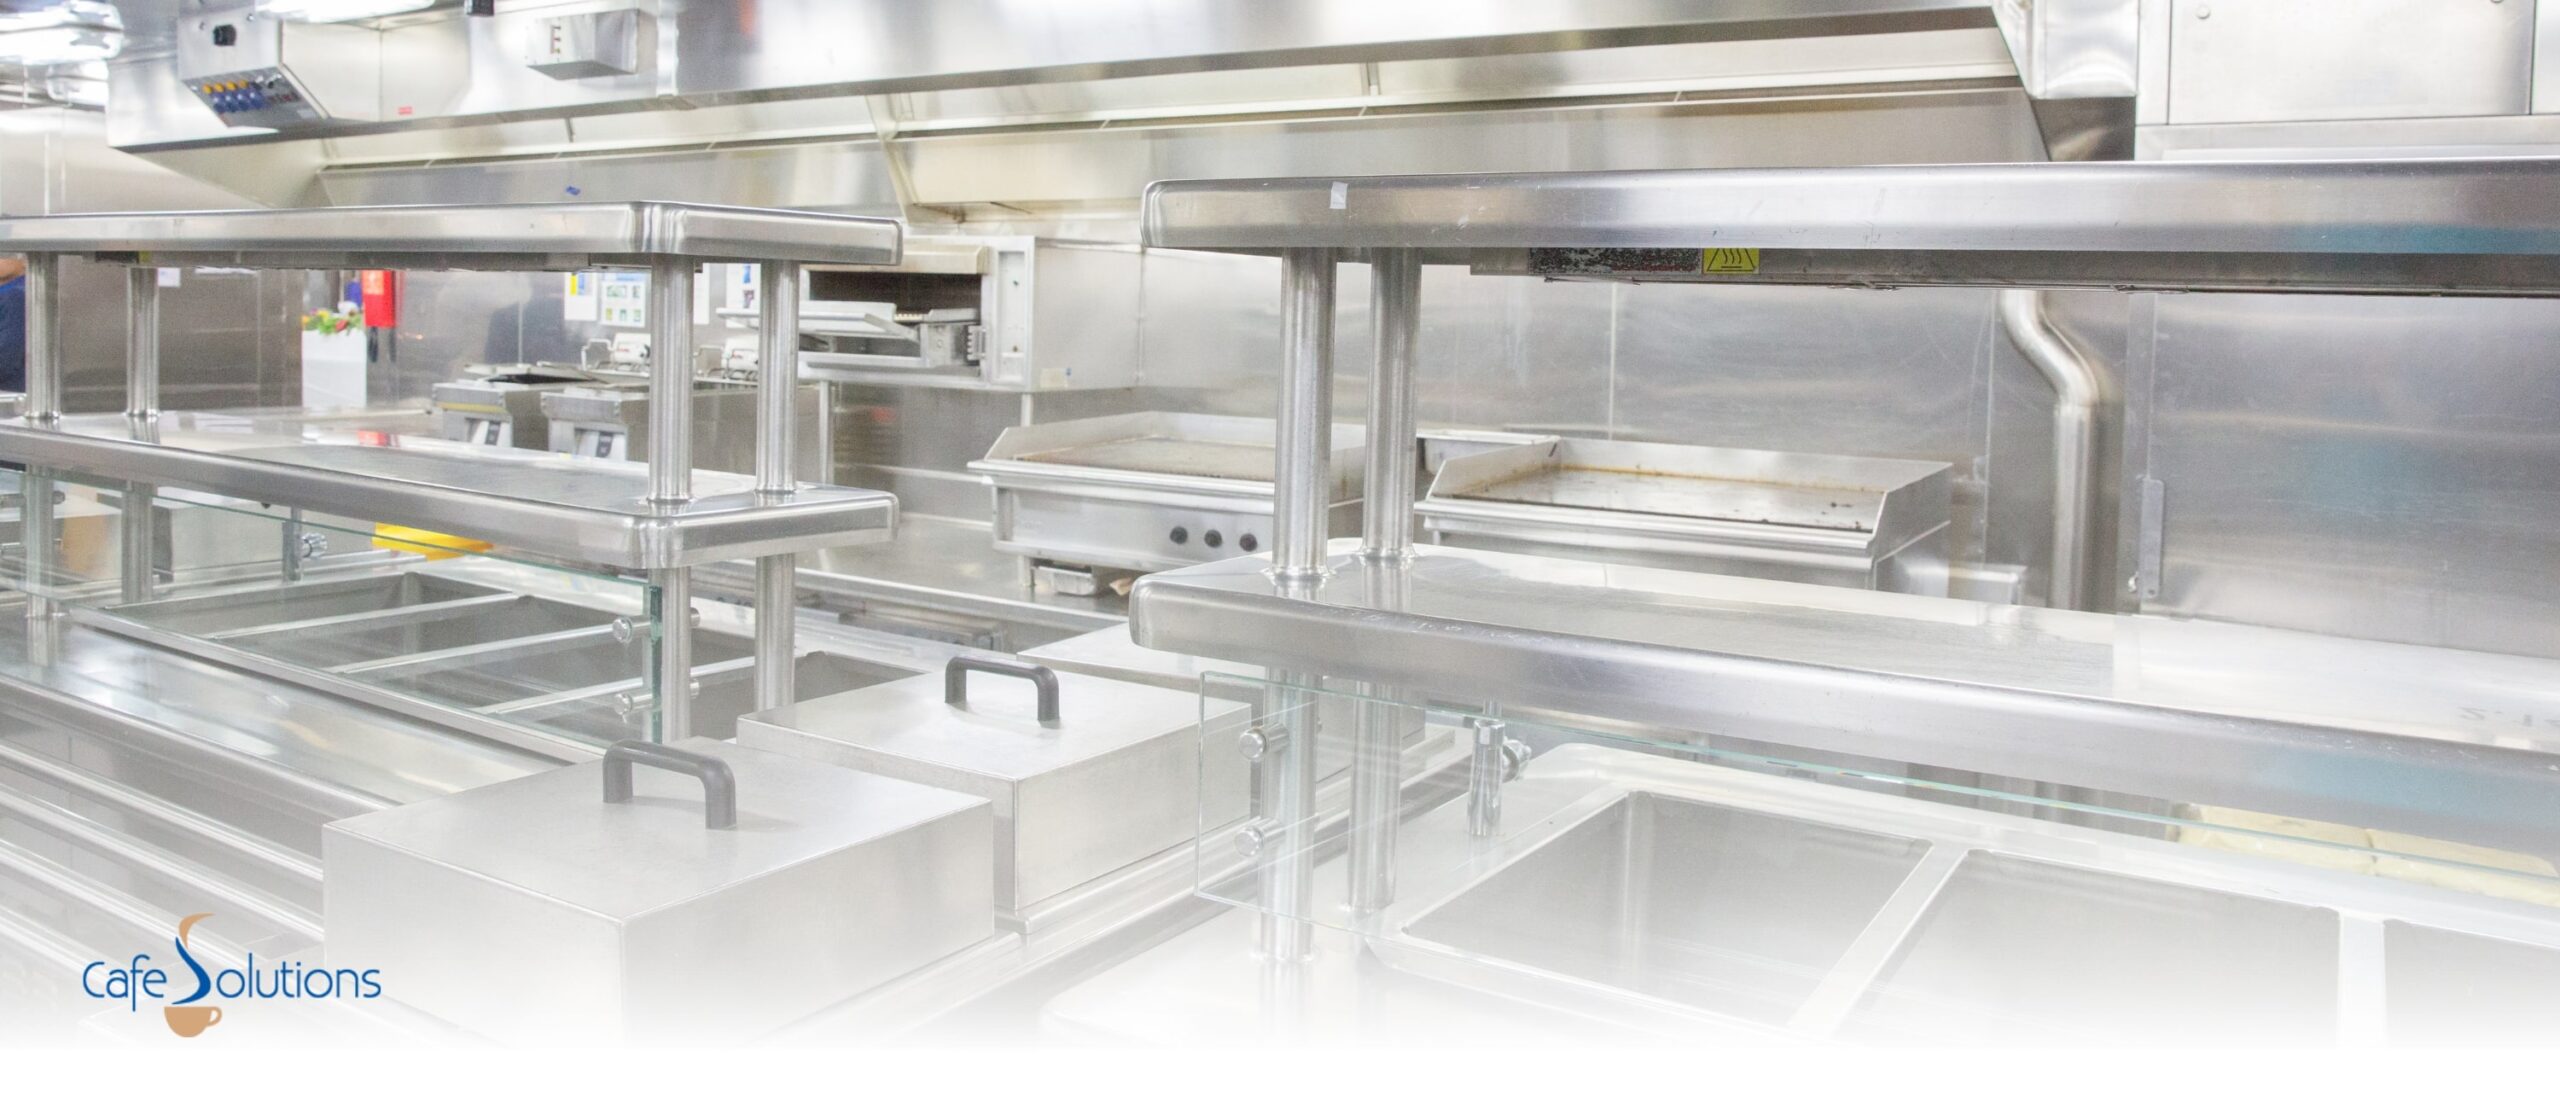 why is stainless steel used in kitchens?